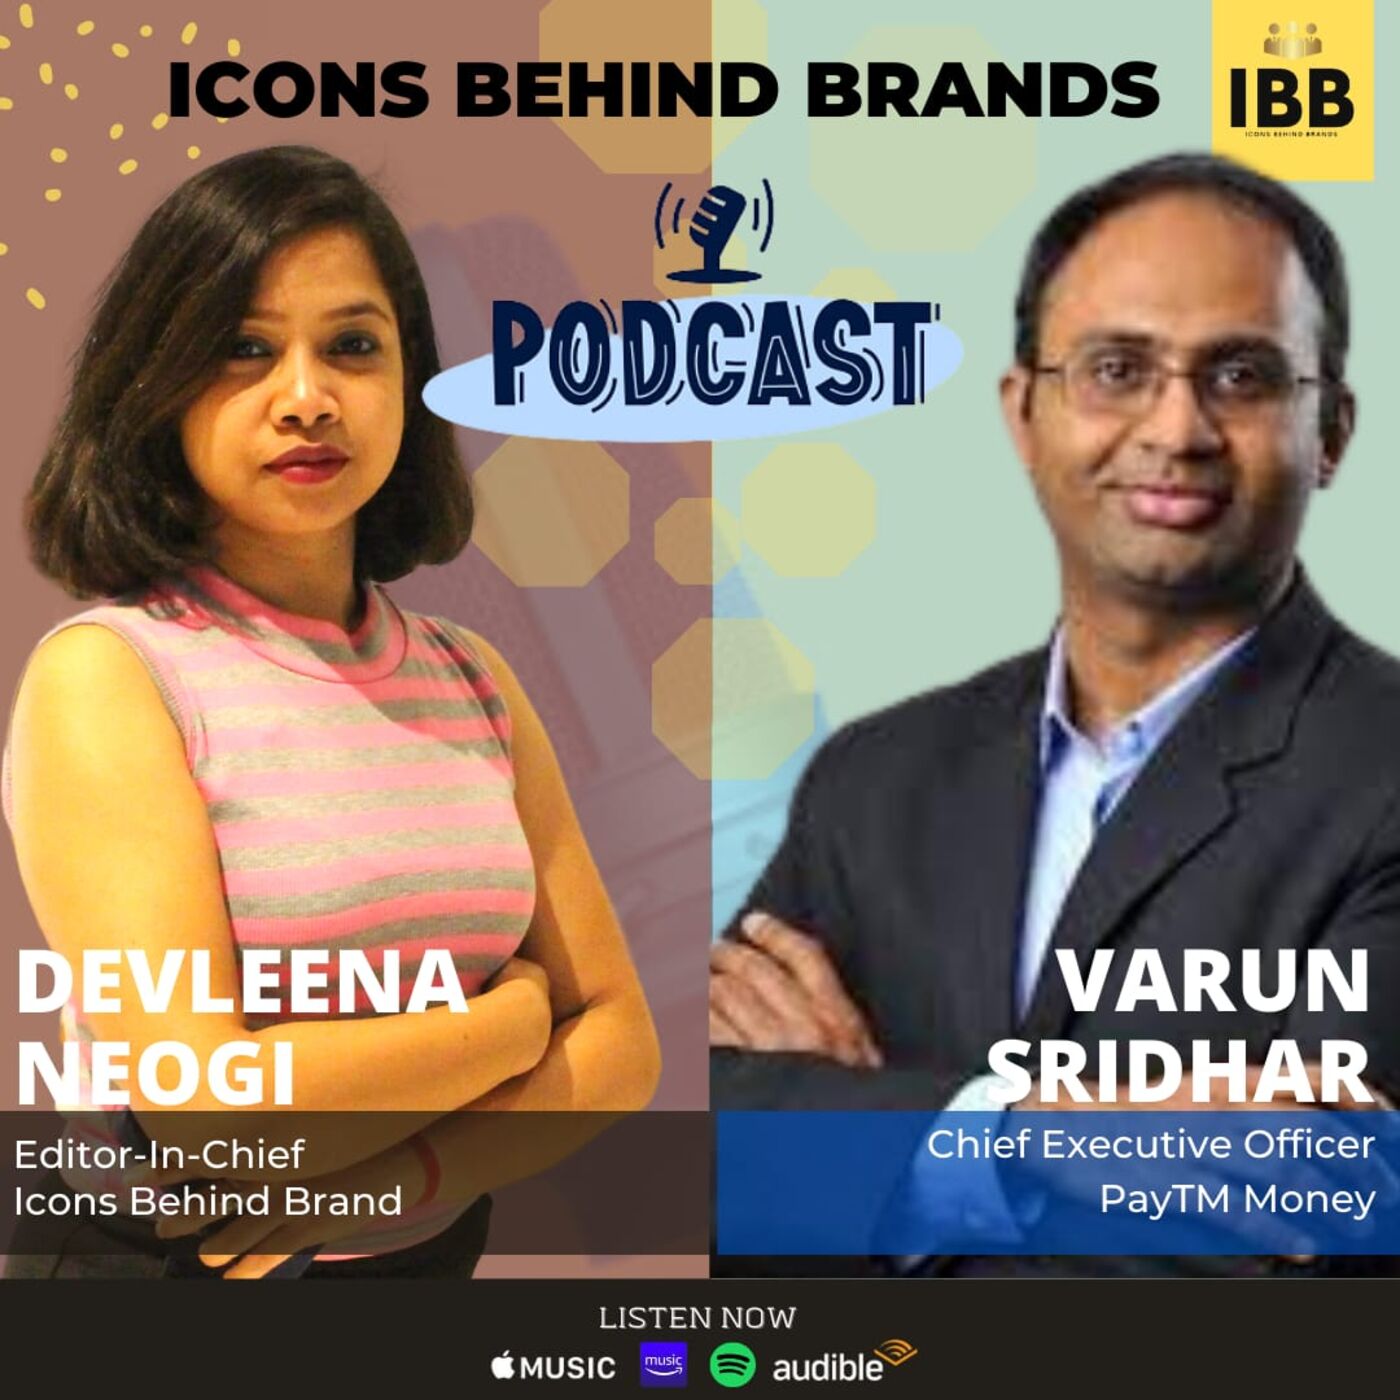 Our upcoming, brand new episode of CXO Spotlight features Mr. Varun Sridhar, Chief Executive Officer of Paytm Money Limited | Icons Behind Brands